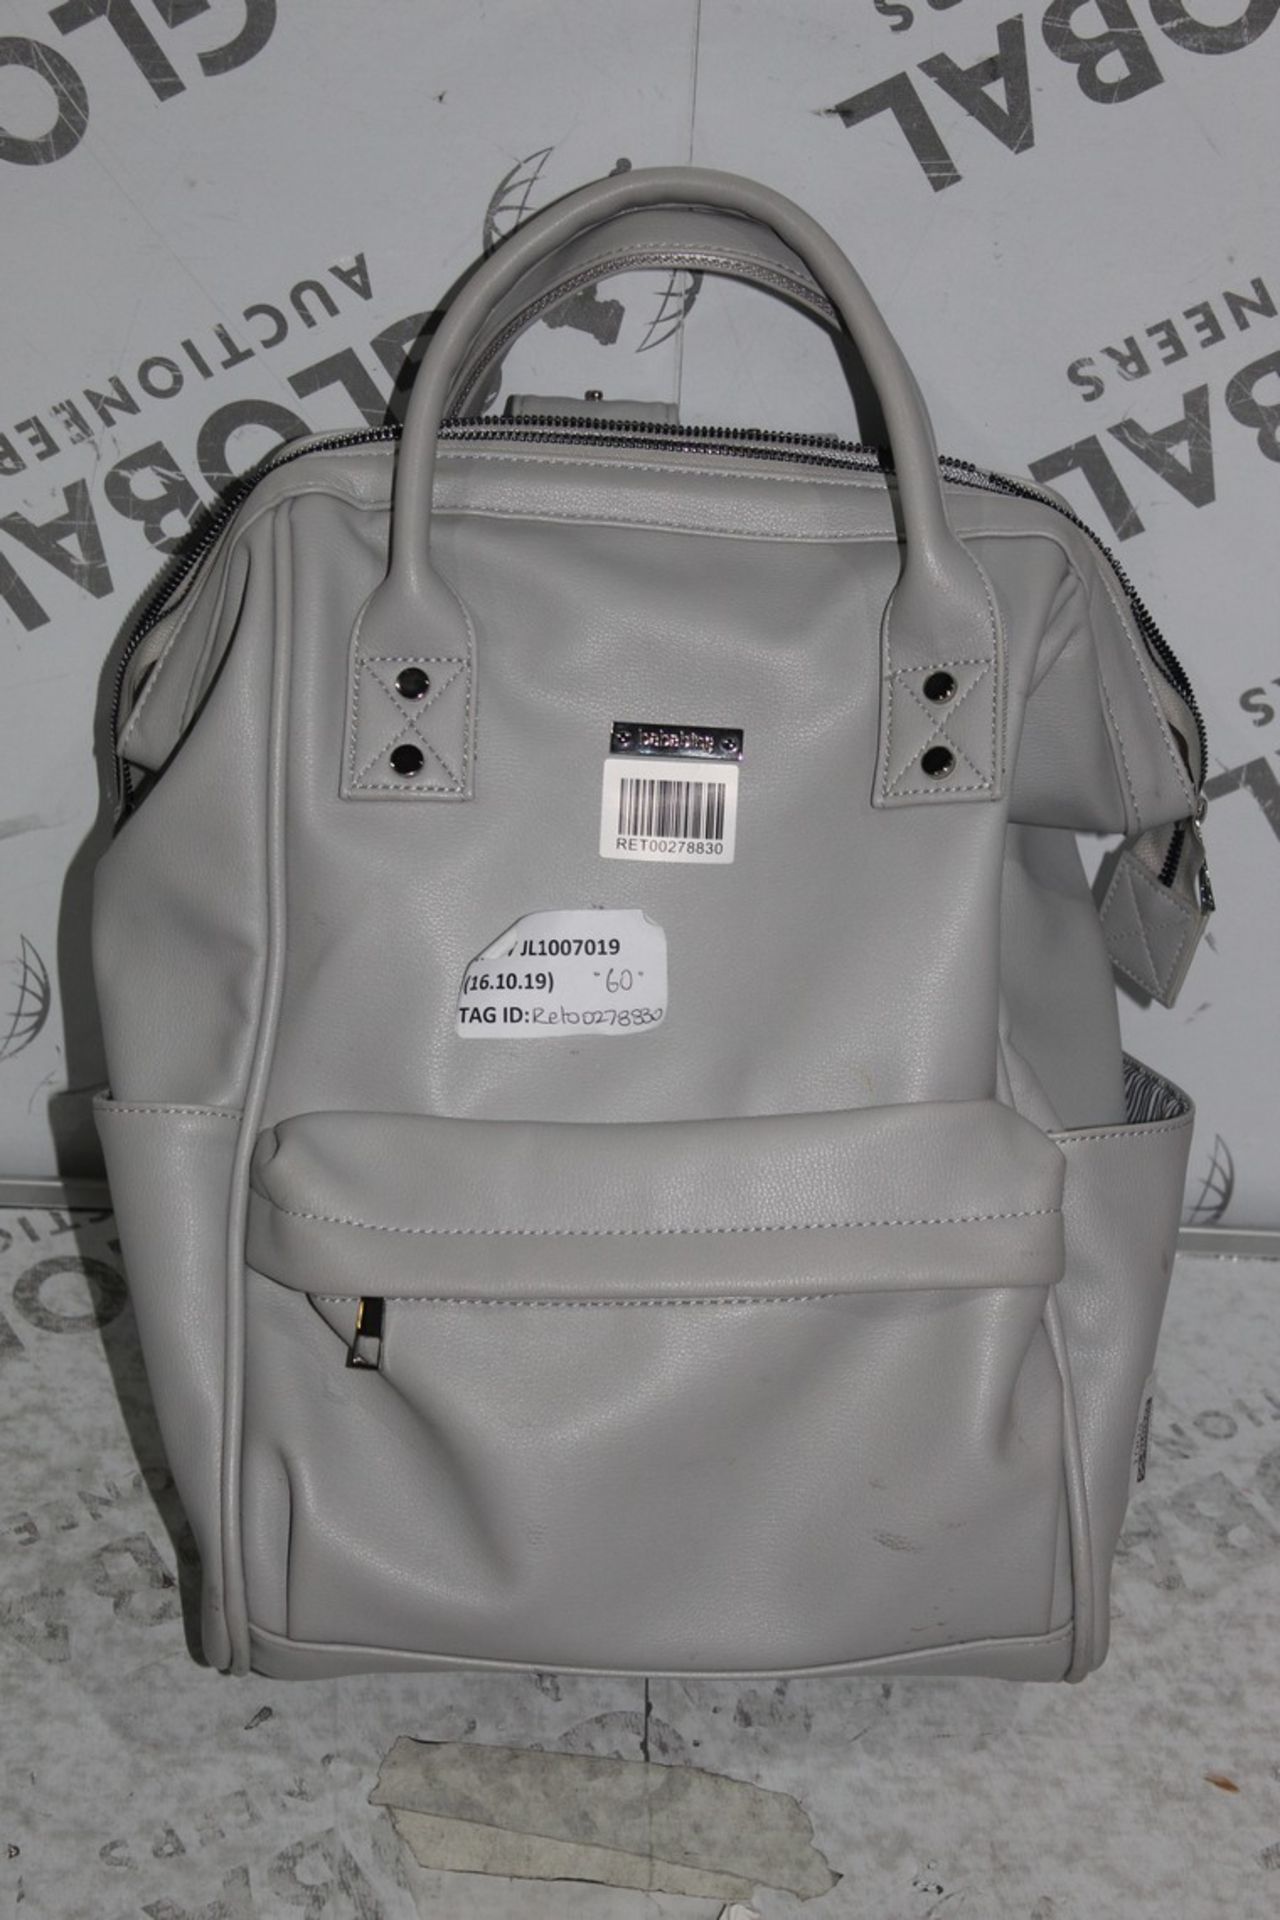 BaBaBing Children's Nursery Changing Bag RRP £60 (RET00278830) (Public Viewing and Appraisals